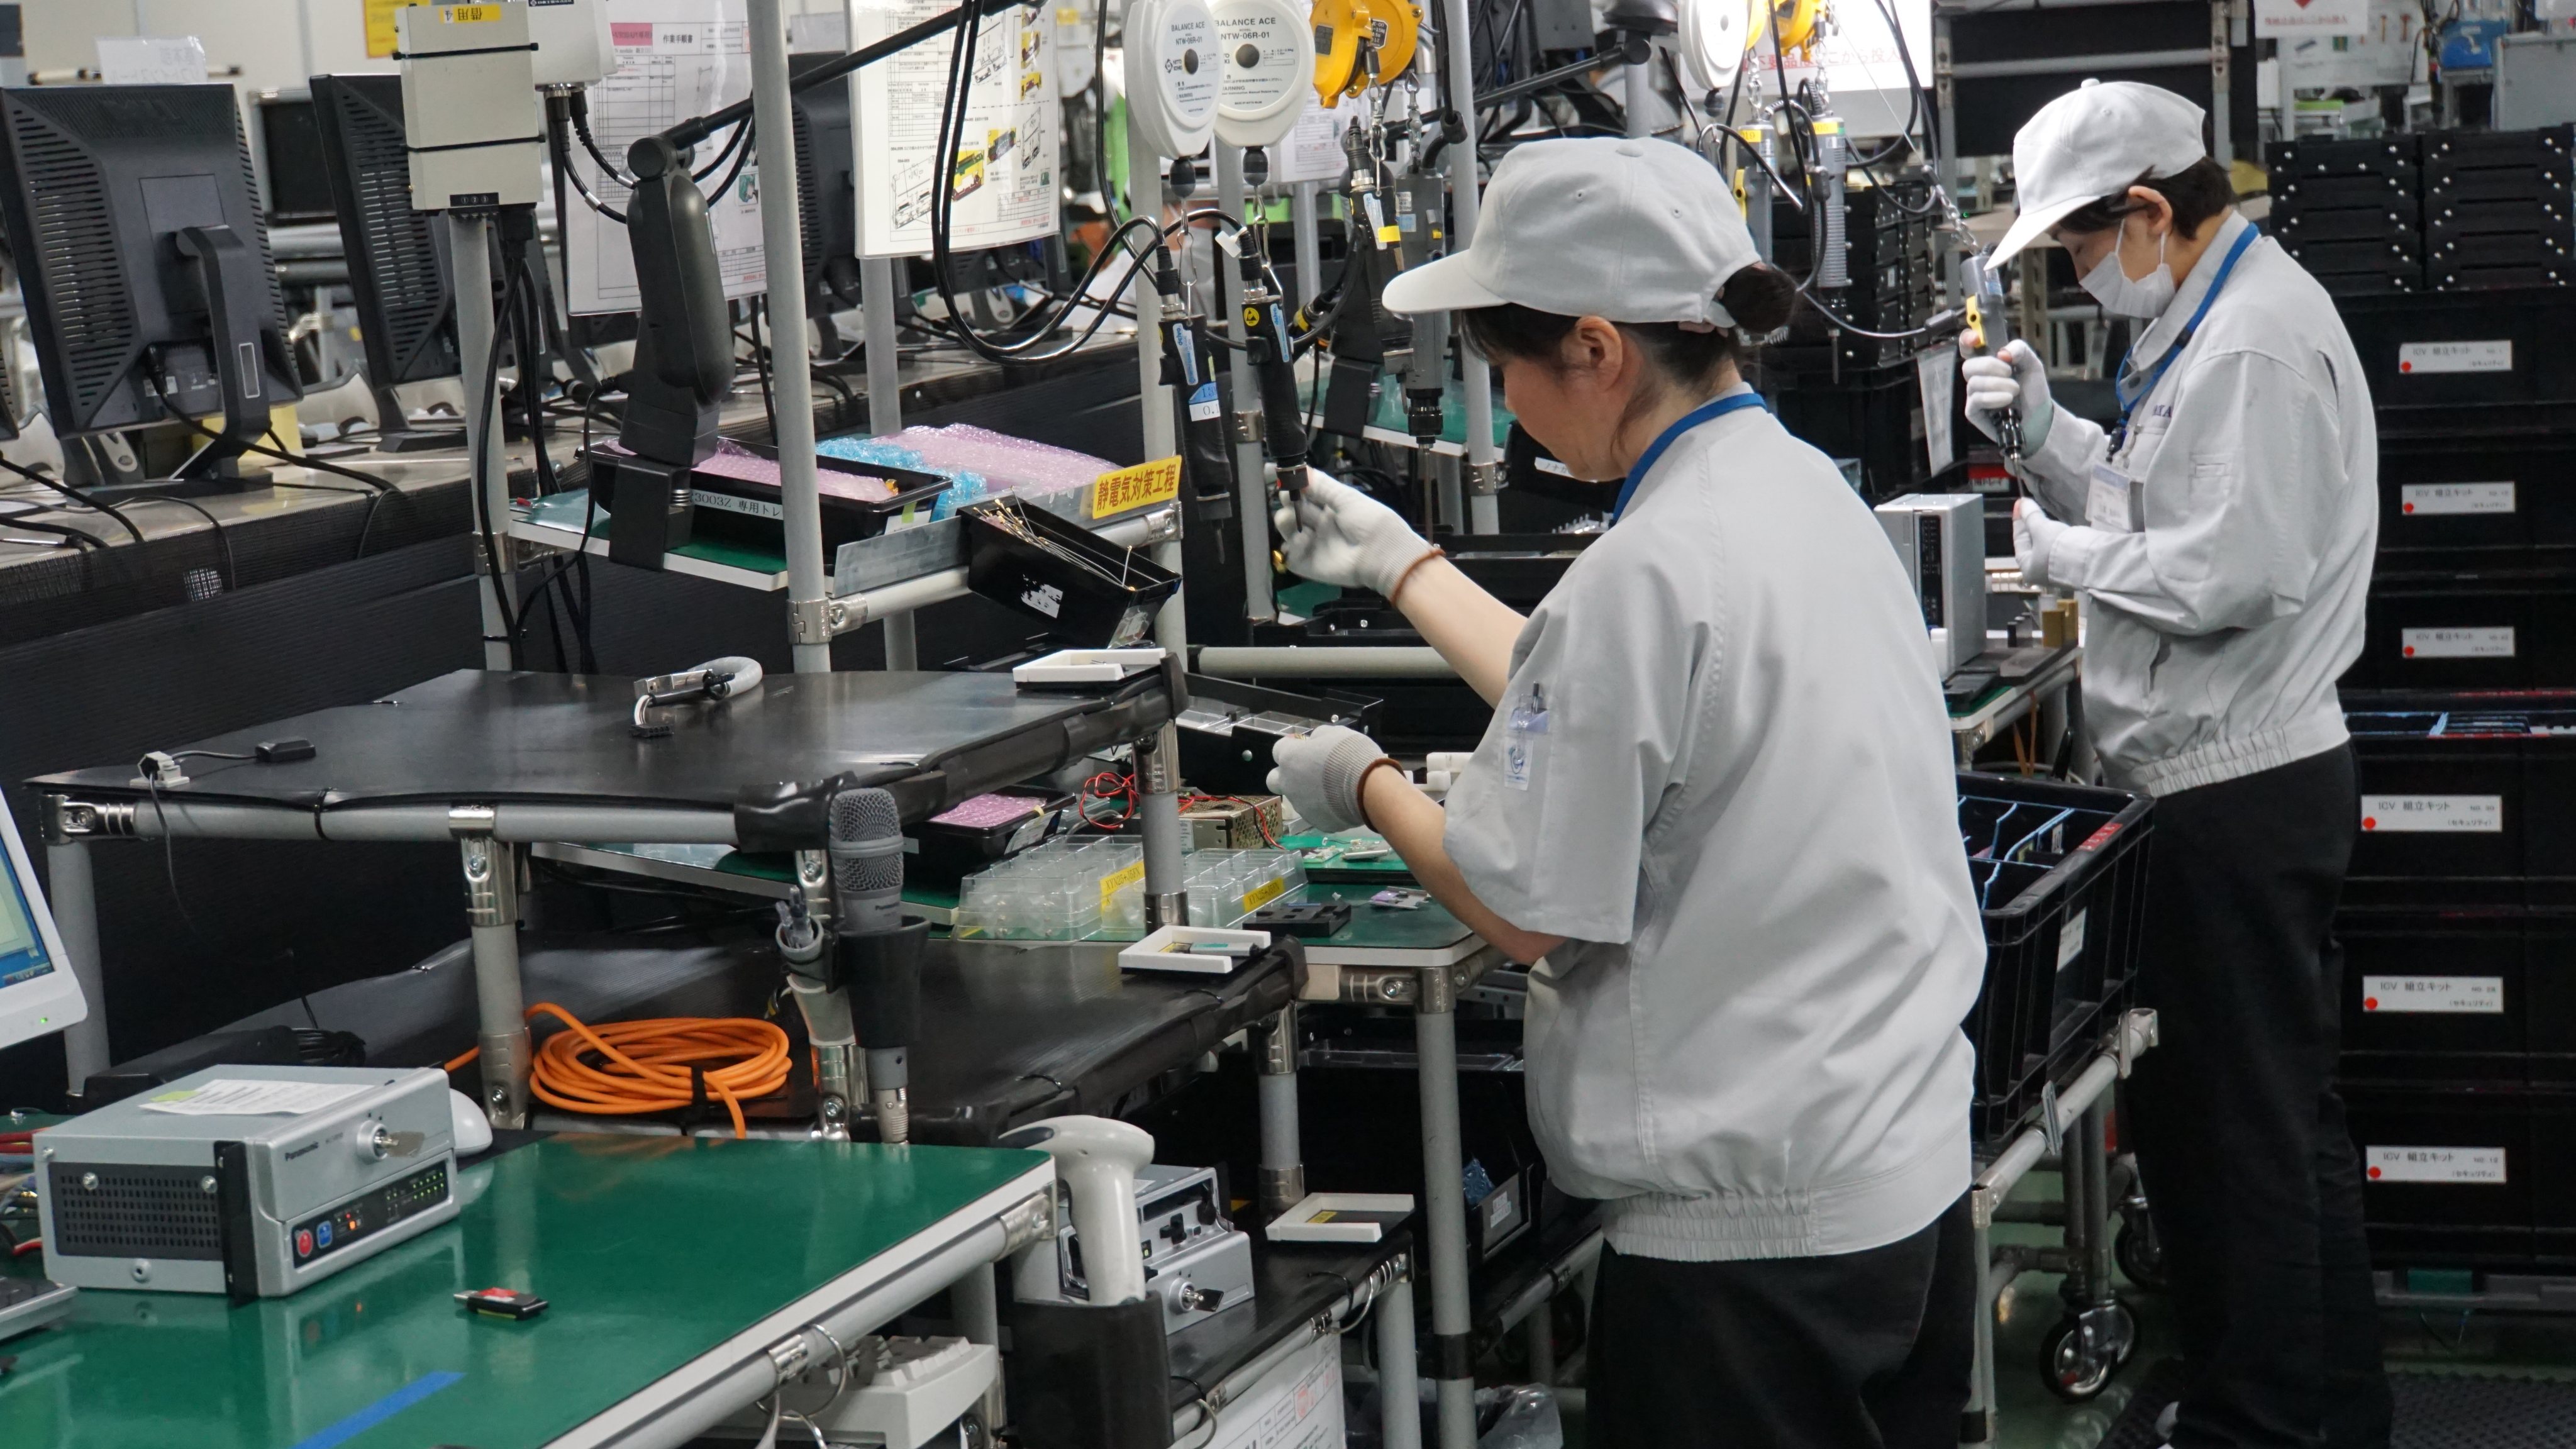 Workers in Panasonic factory